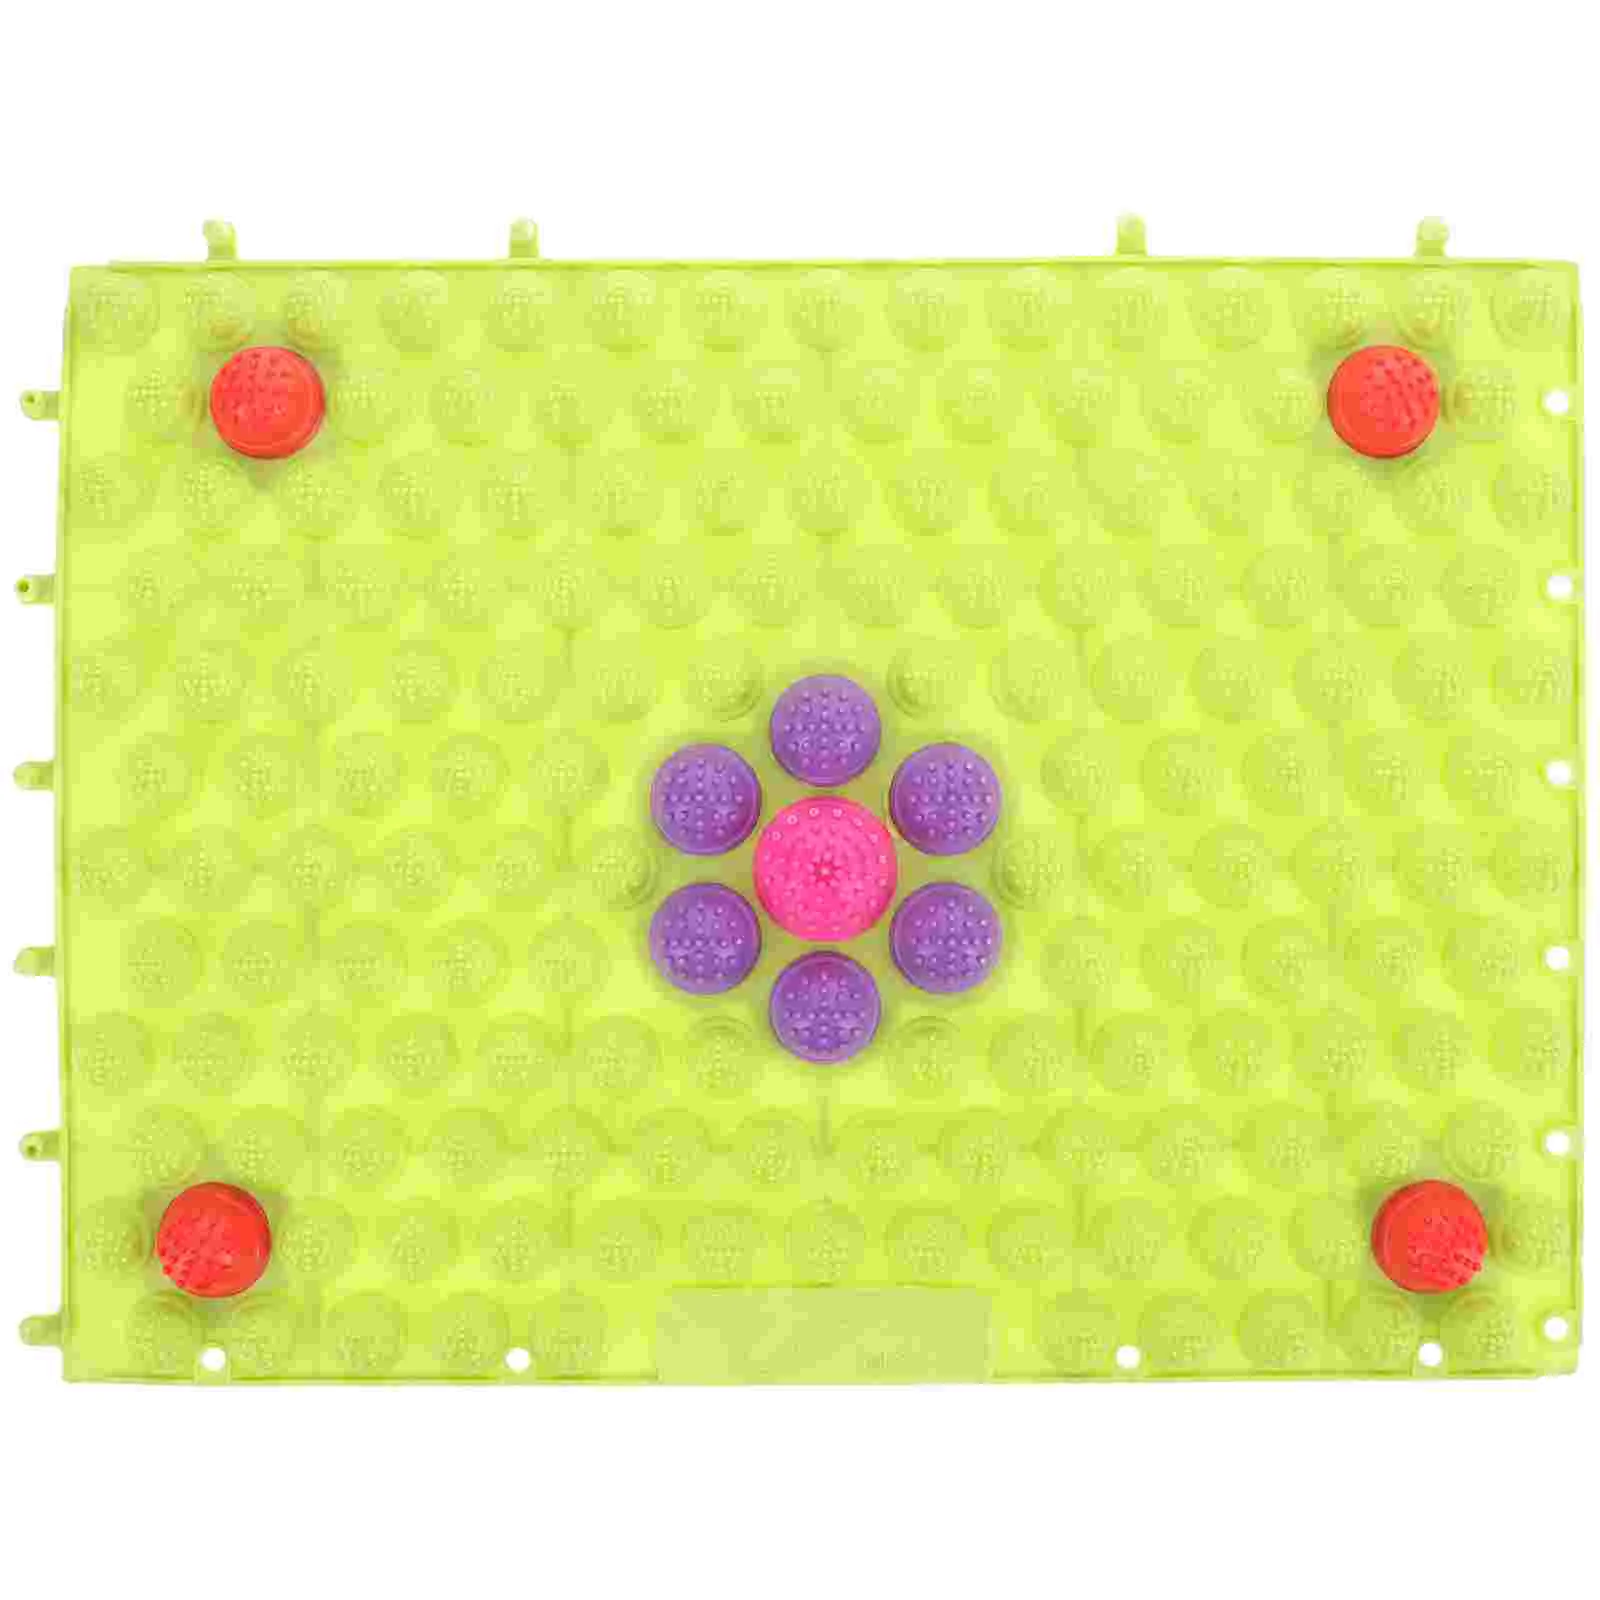 

Acupressure Foot Mat Safe Sole Massage Toe Plate Body Massager Acupoint Stimulation Massaging Tool Care Home Use